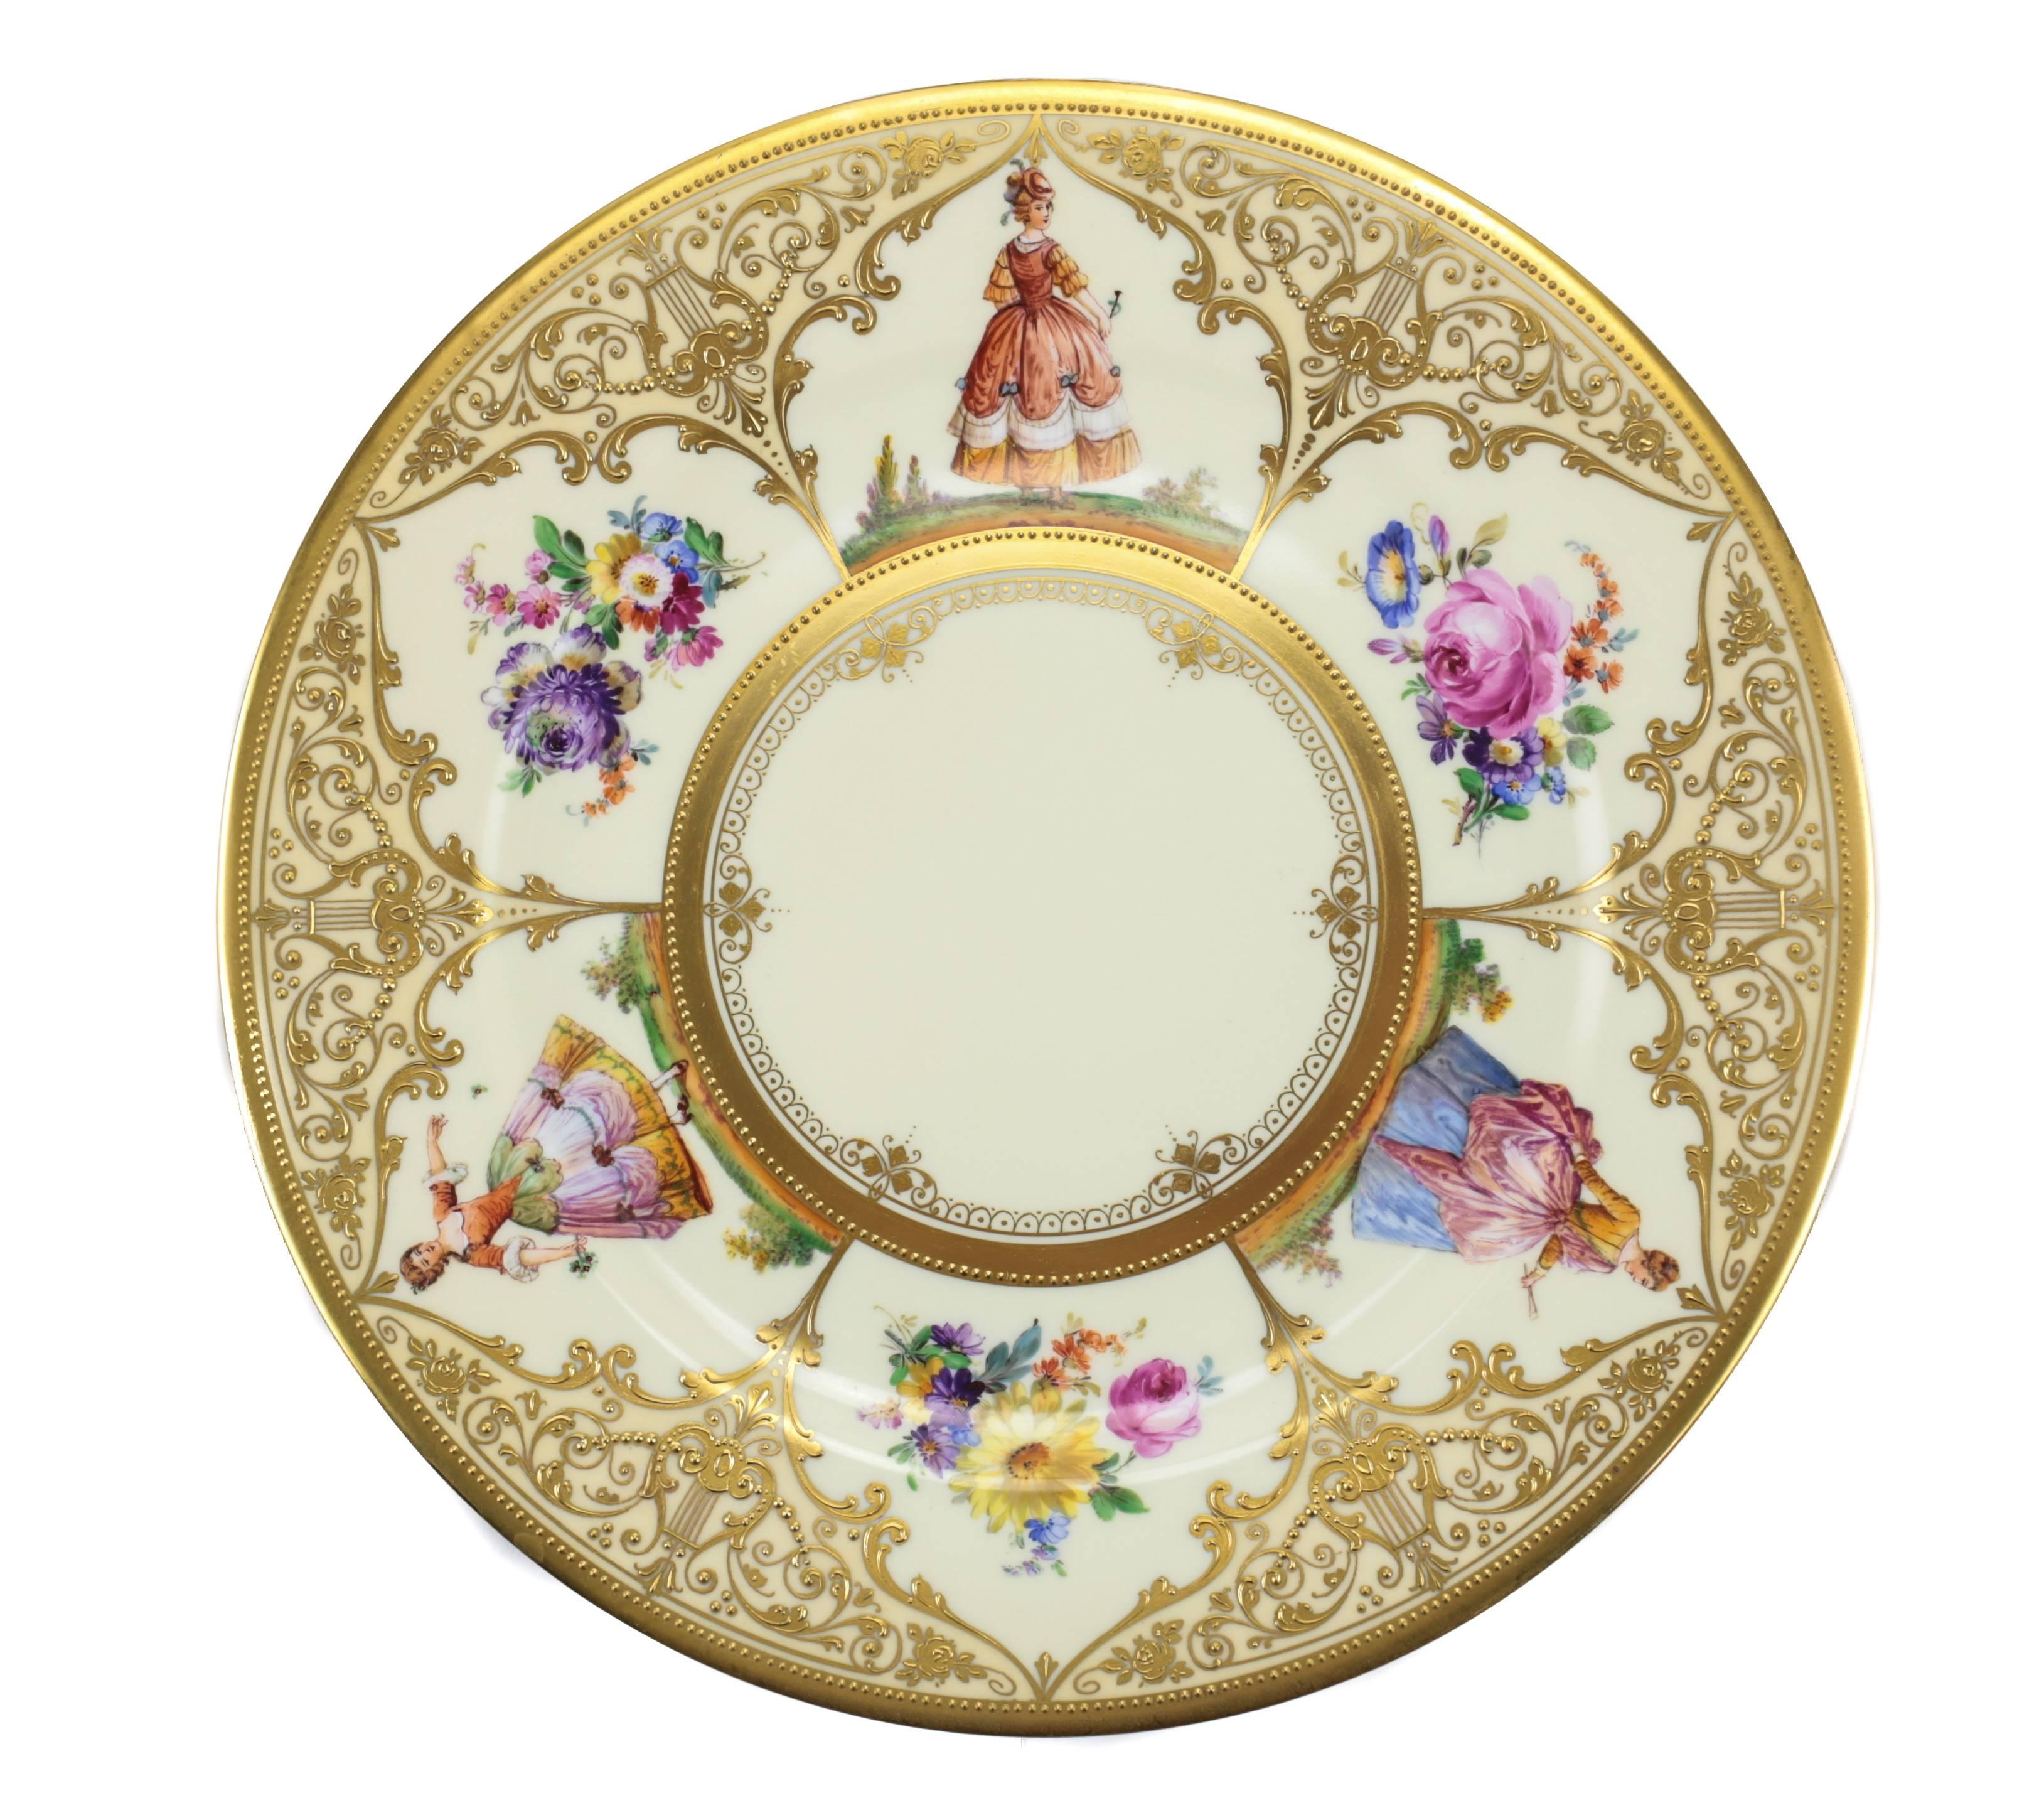 A very attractive set of twelve large Dresden cabinet plates by Ambrosius Lamm, colorful and vibrant hand-painted interchanging panels of floral bouquets and ladies in Victorian dress, forming a six pointed star or snowflake. The borders heavily